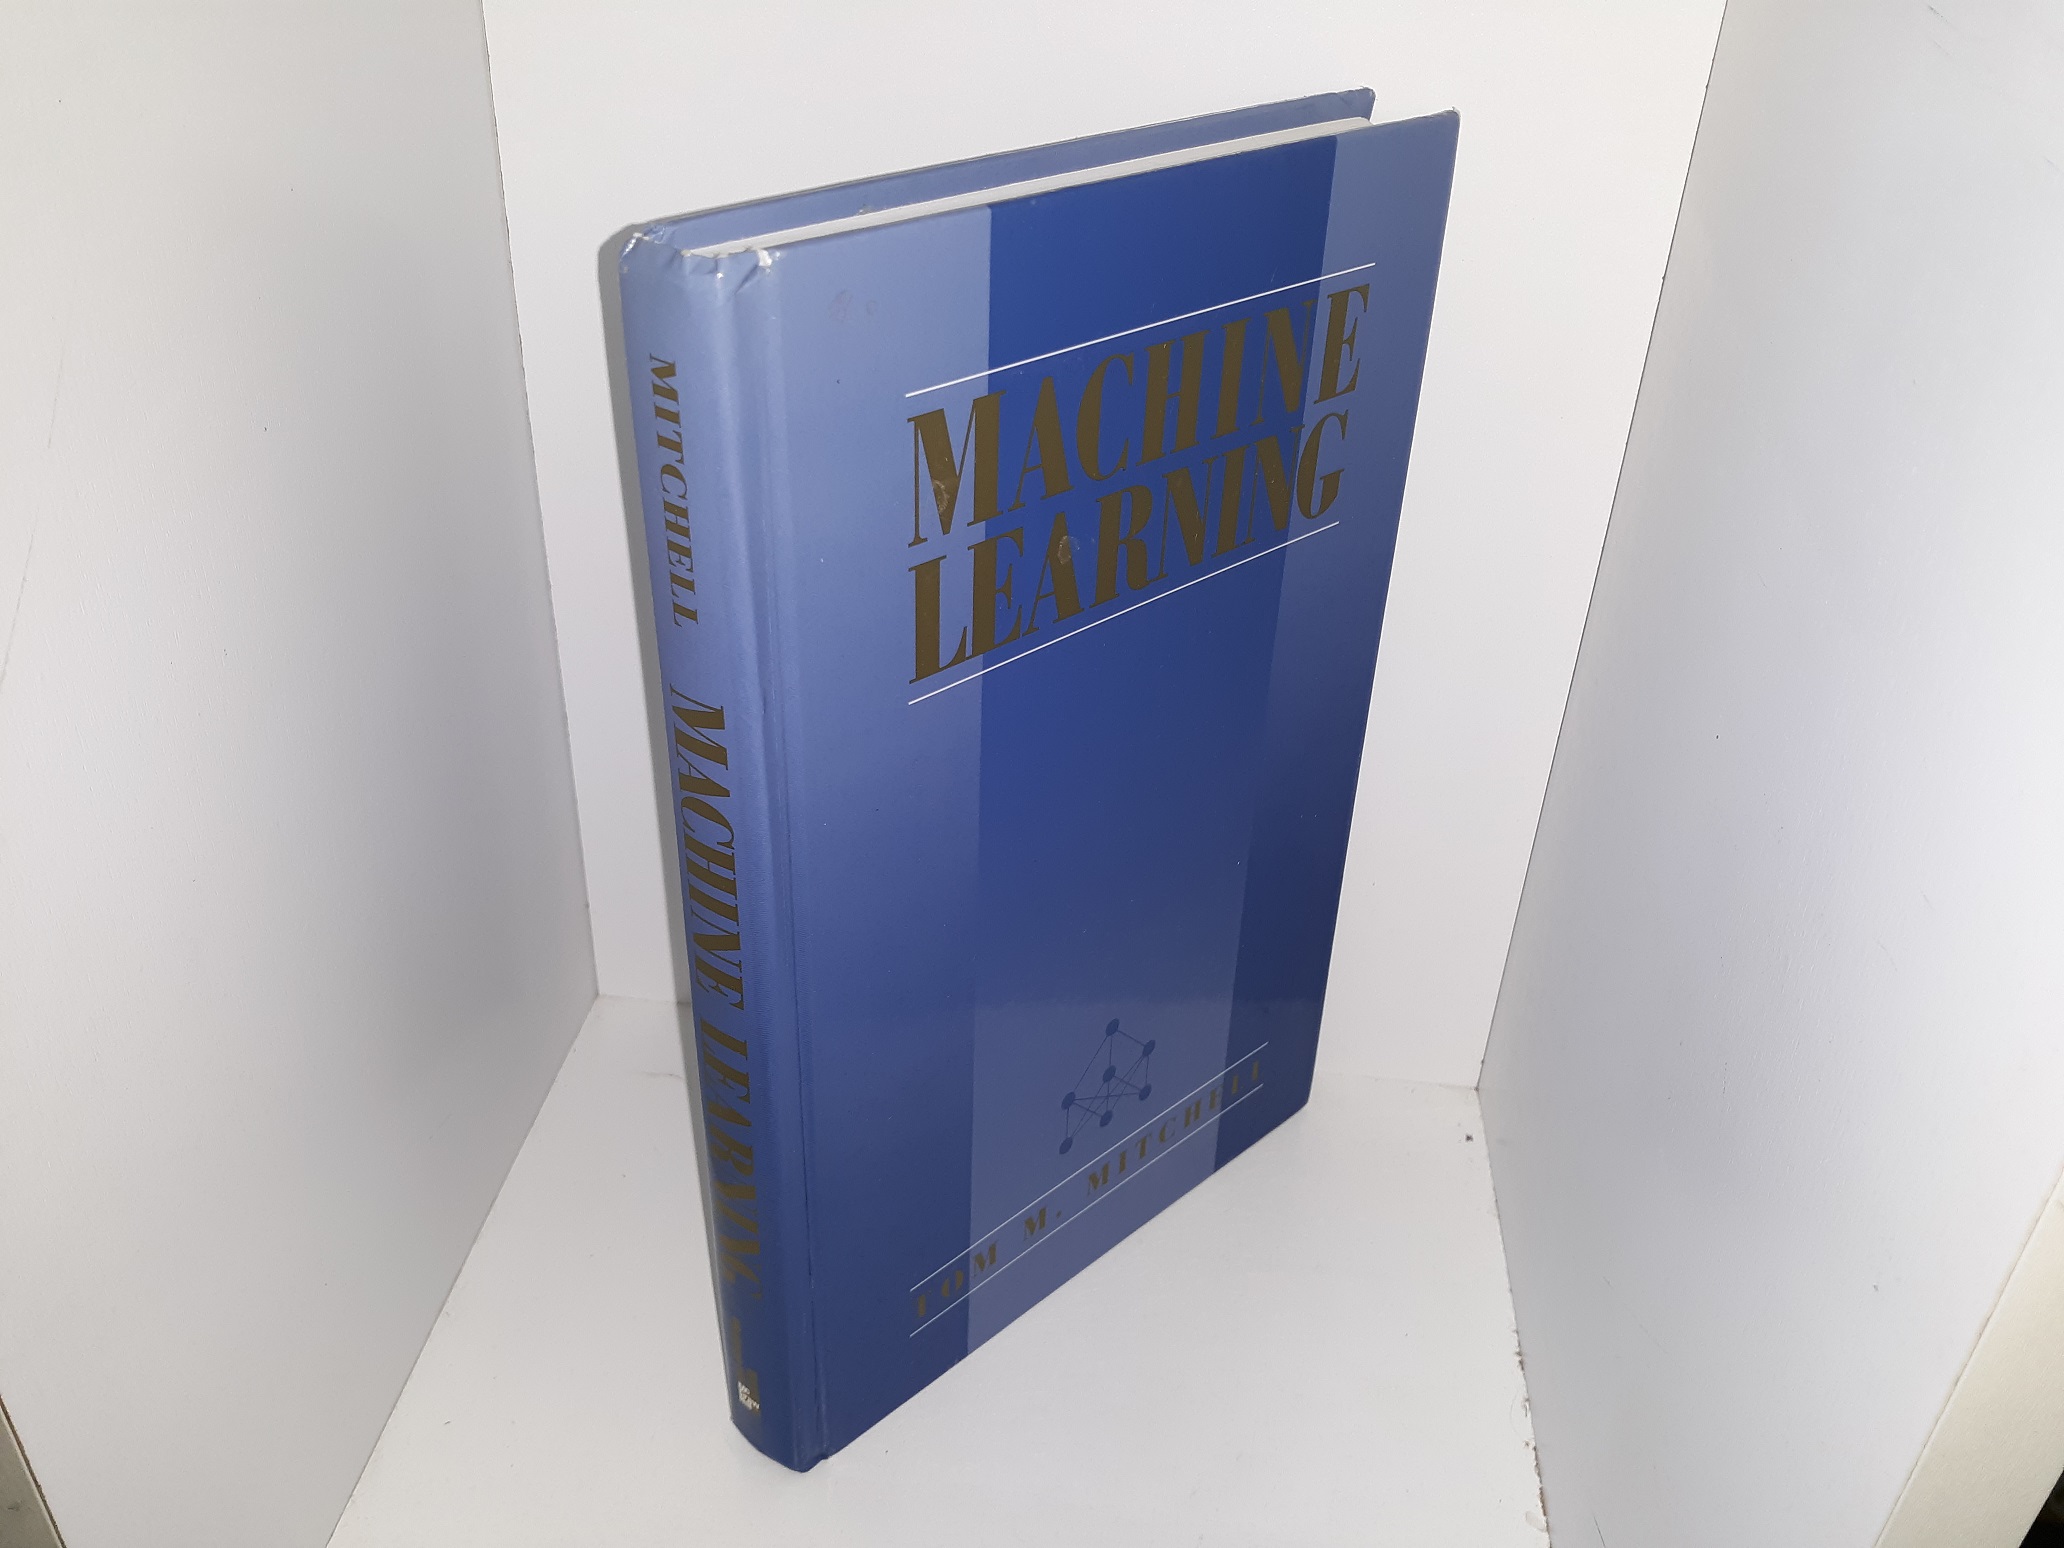 Machine Learning by Tom M. Mitchell - Hardcover - 1997 - from EH BOOKSTORE  (SKU: 1006)